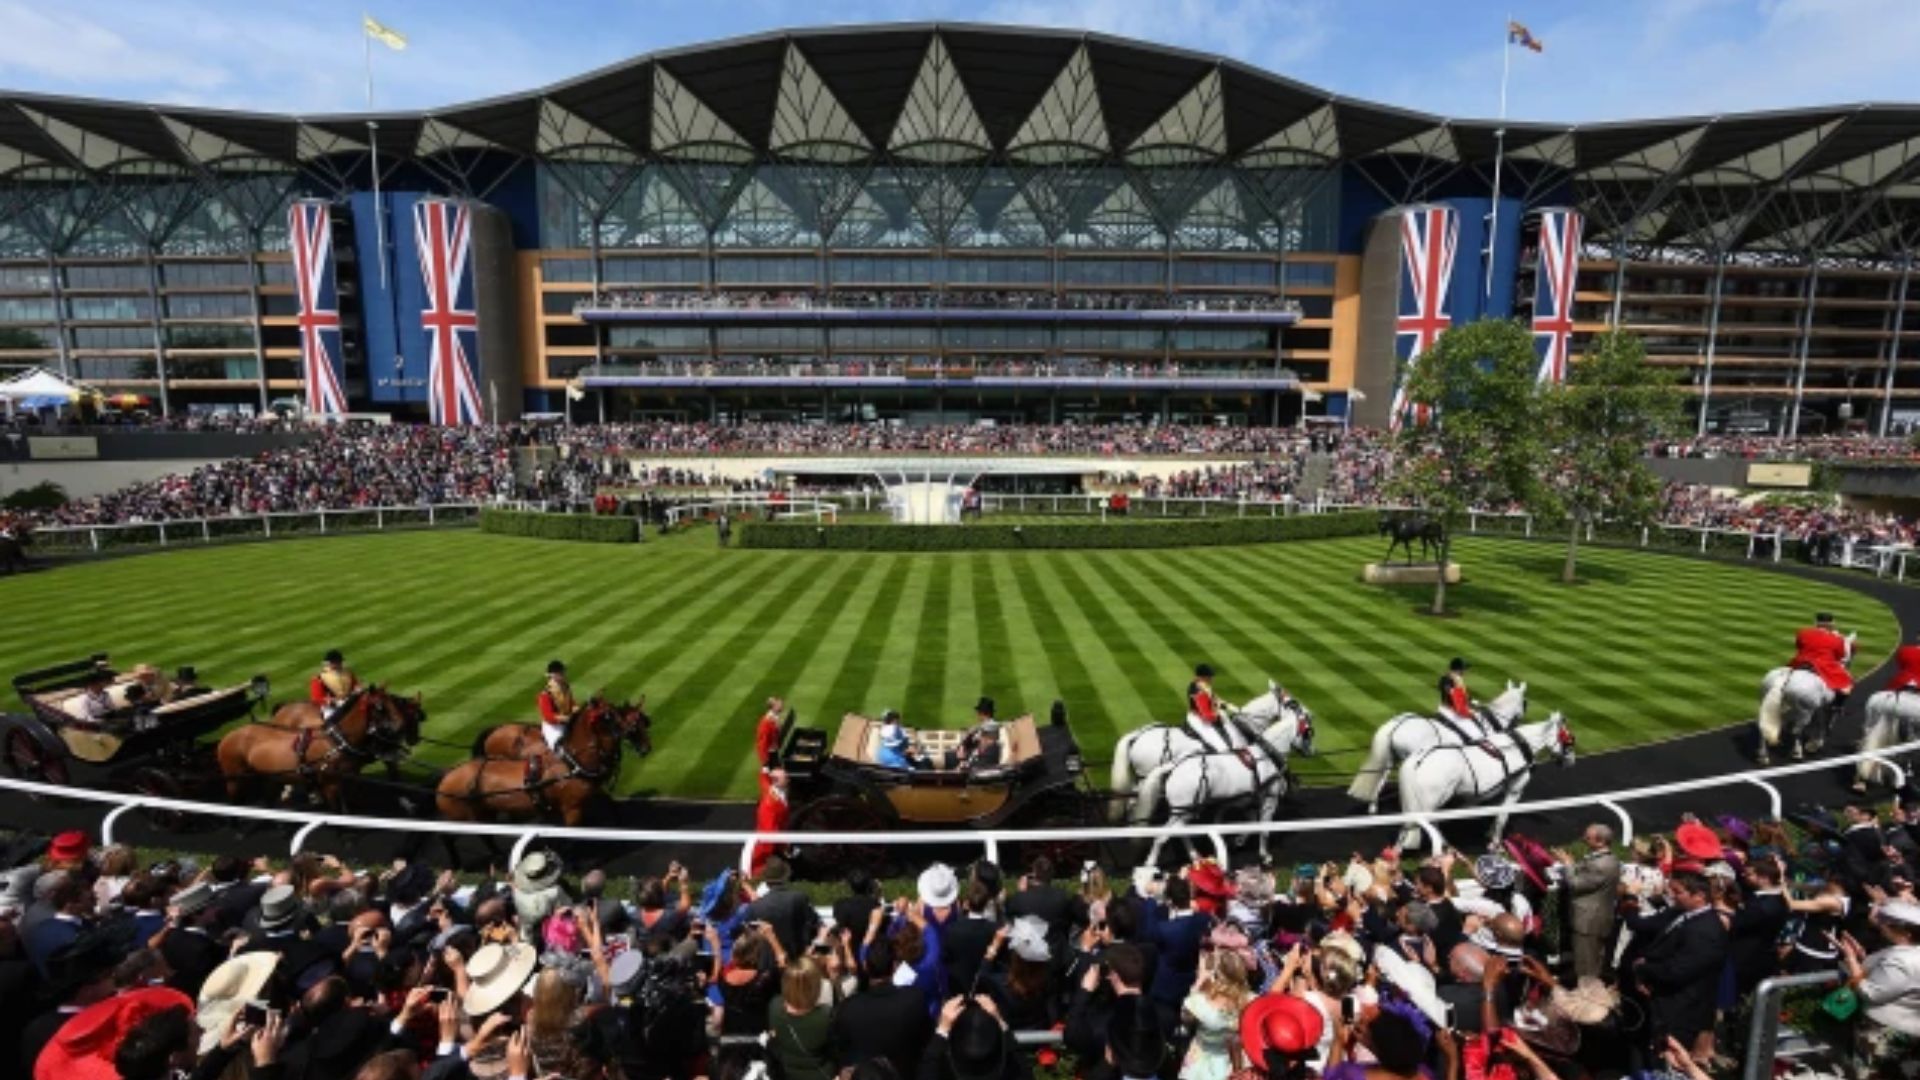 Where is the Royal Ascot racecourse